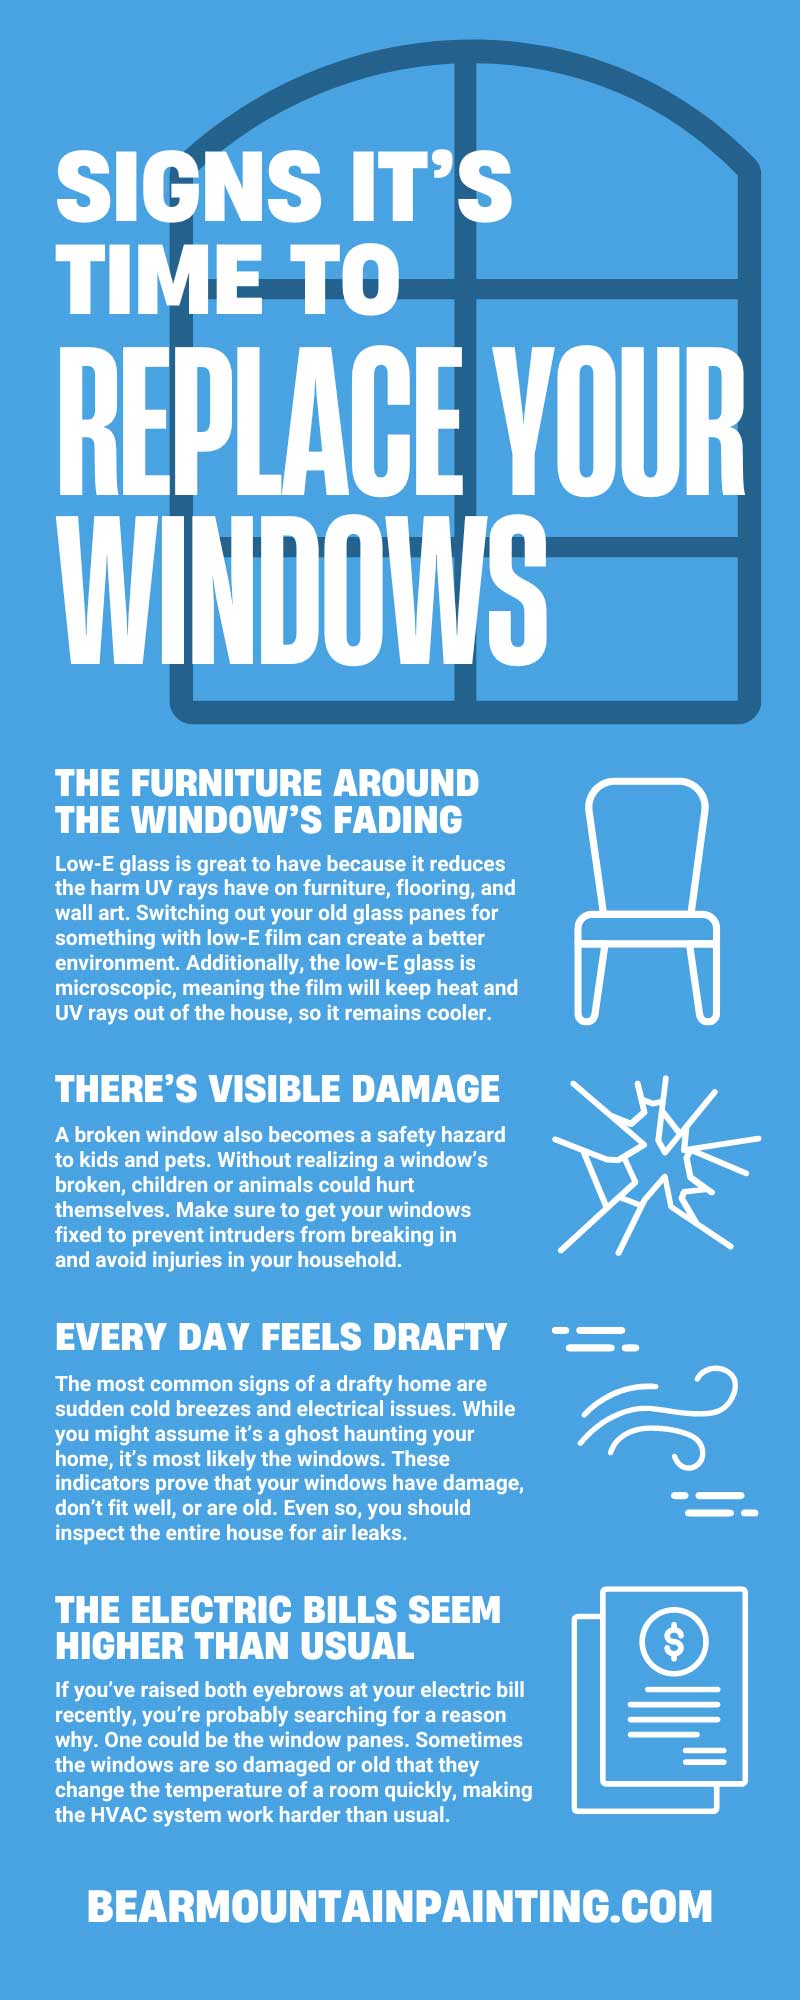 6 Signs It’s Time To Replace Your Windows
